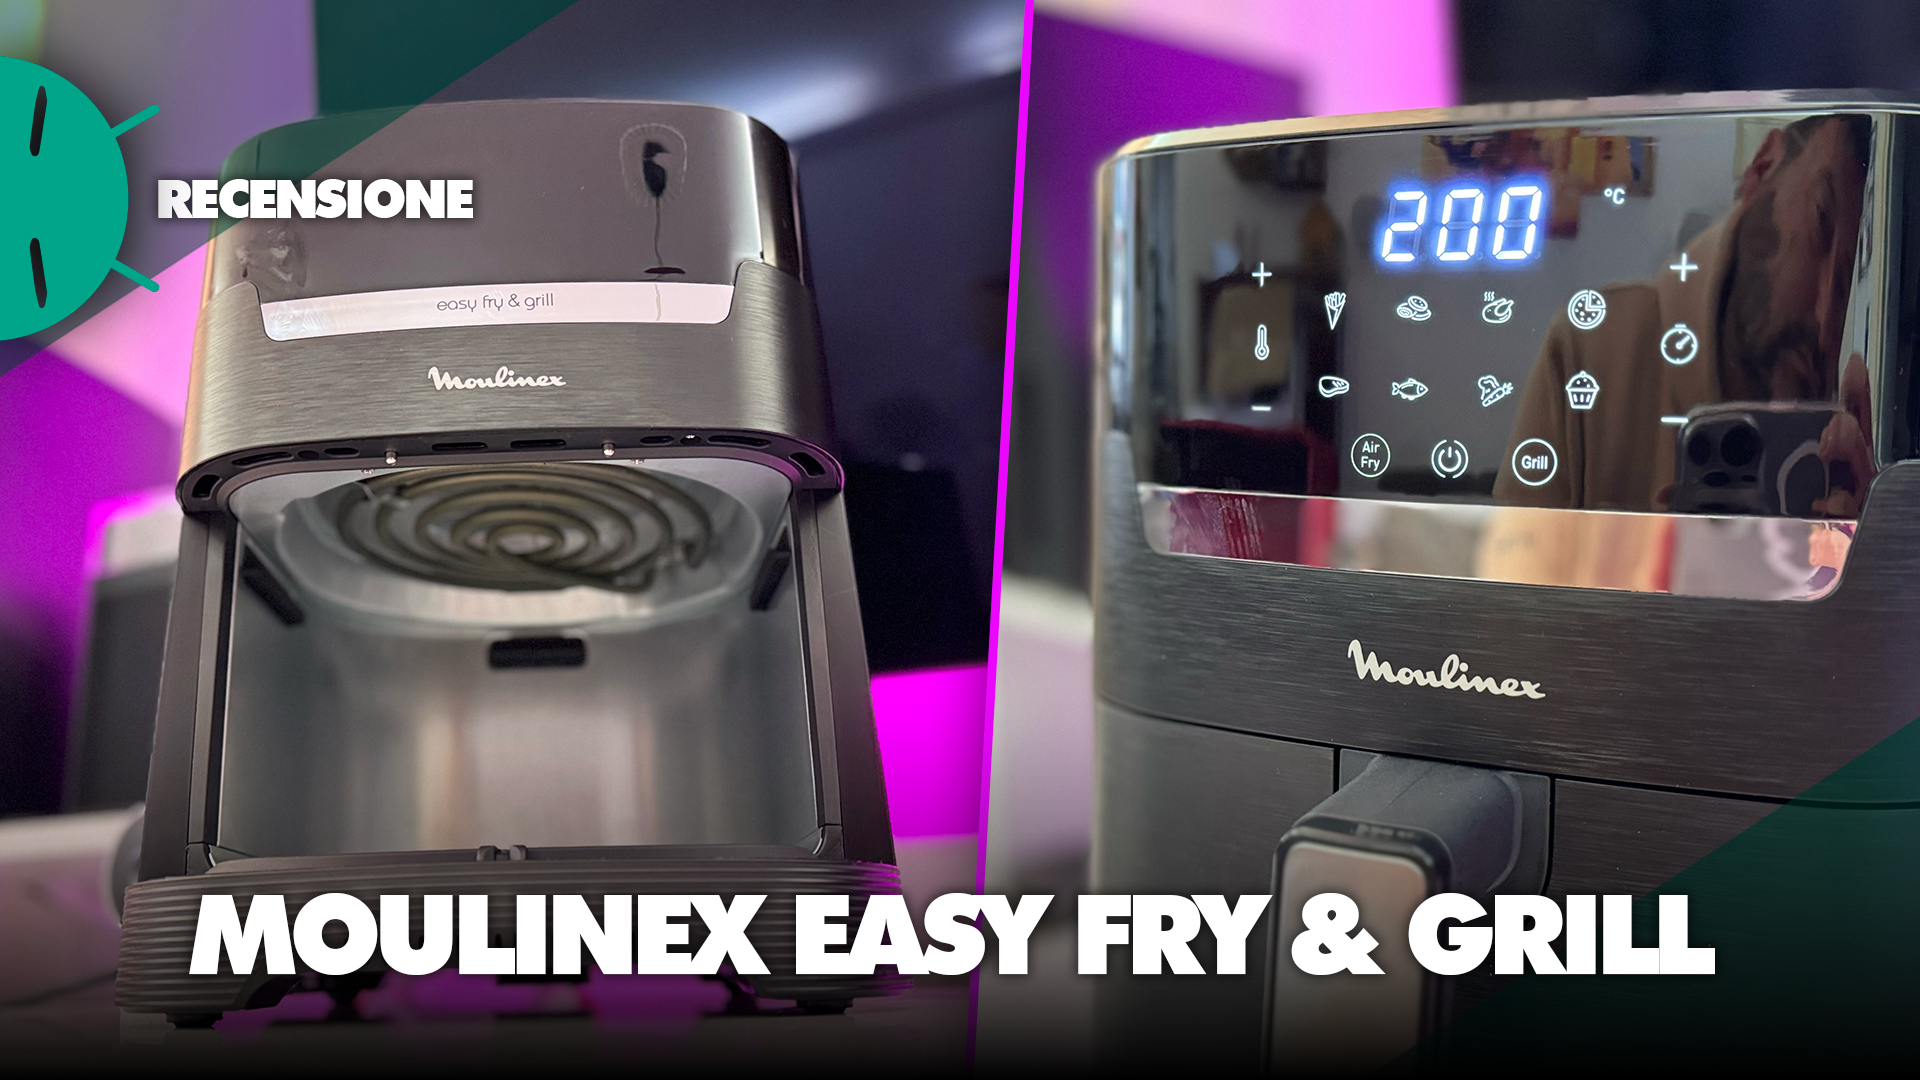 Three in one with Easy Fry Grill & Steam by Moulinex - HA Factory